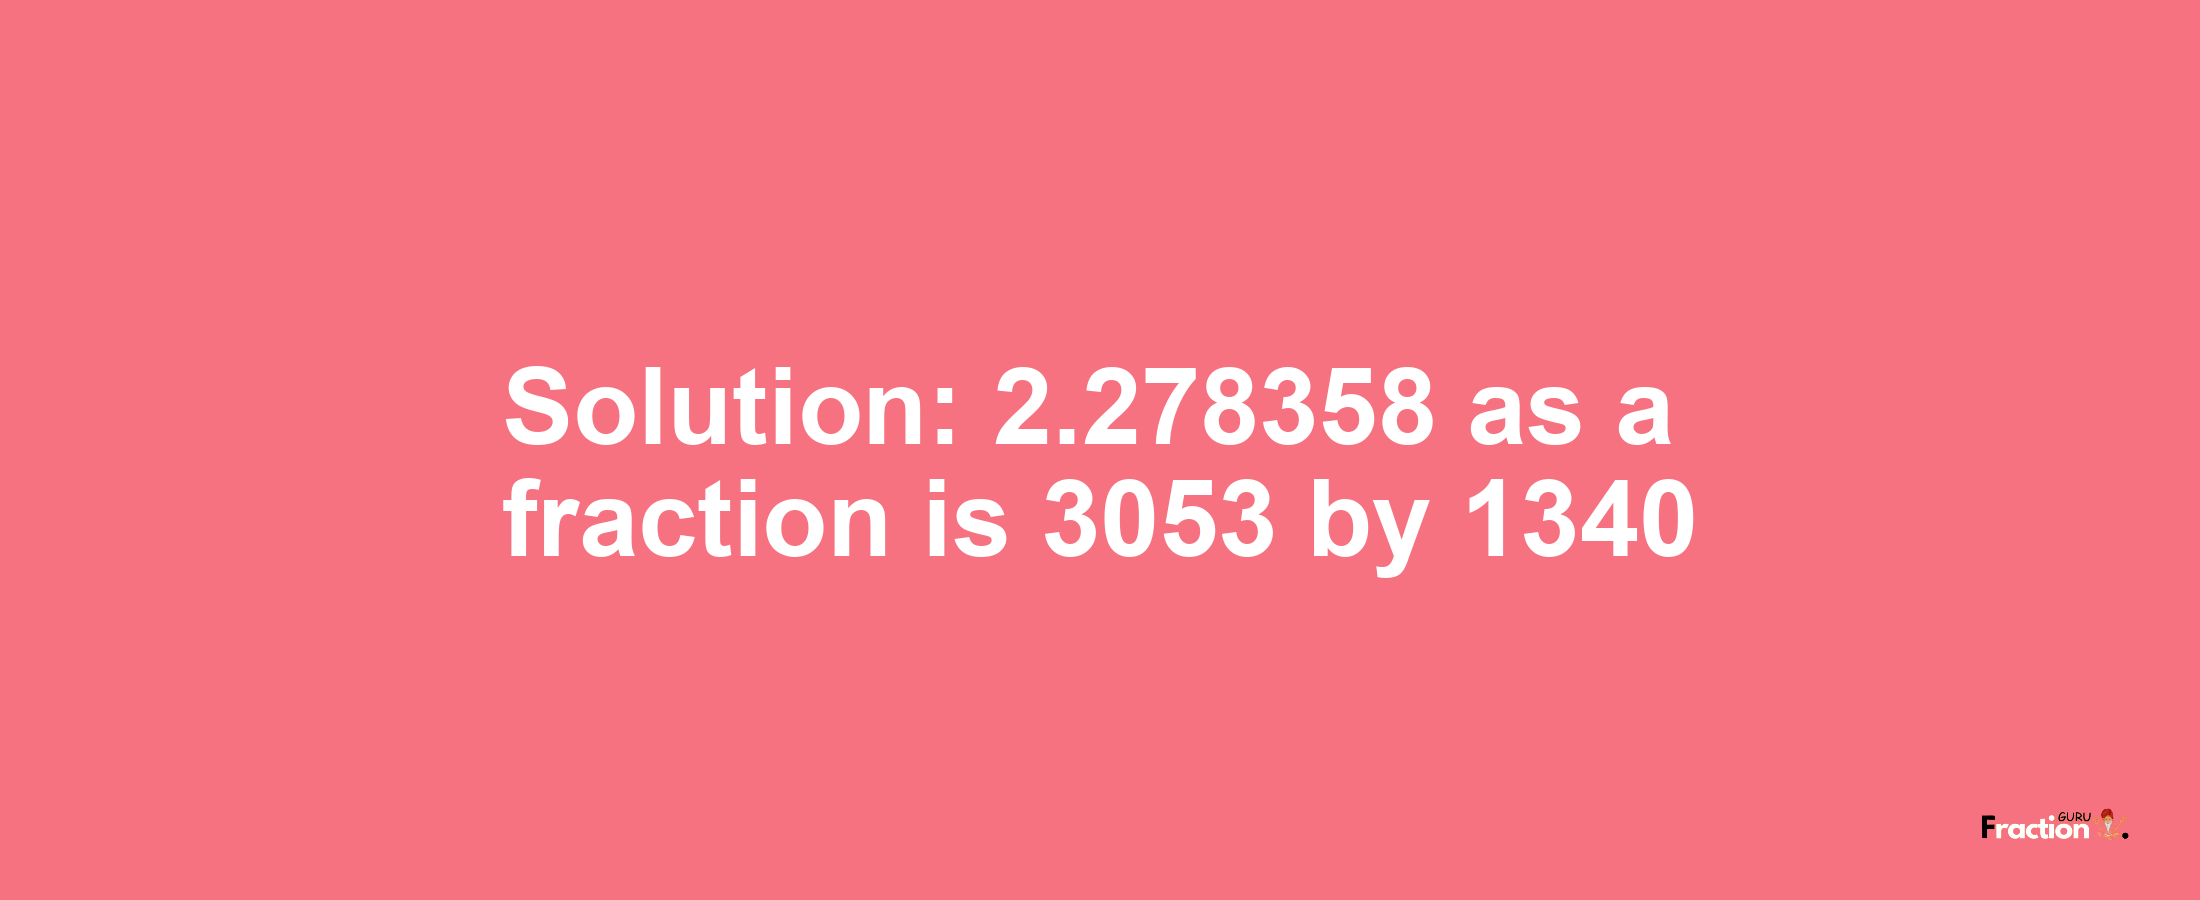 Solution:2.278358 as a fraction is 3053/1340